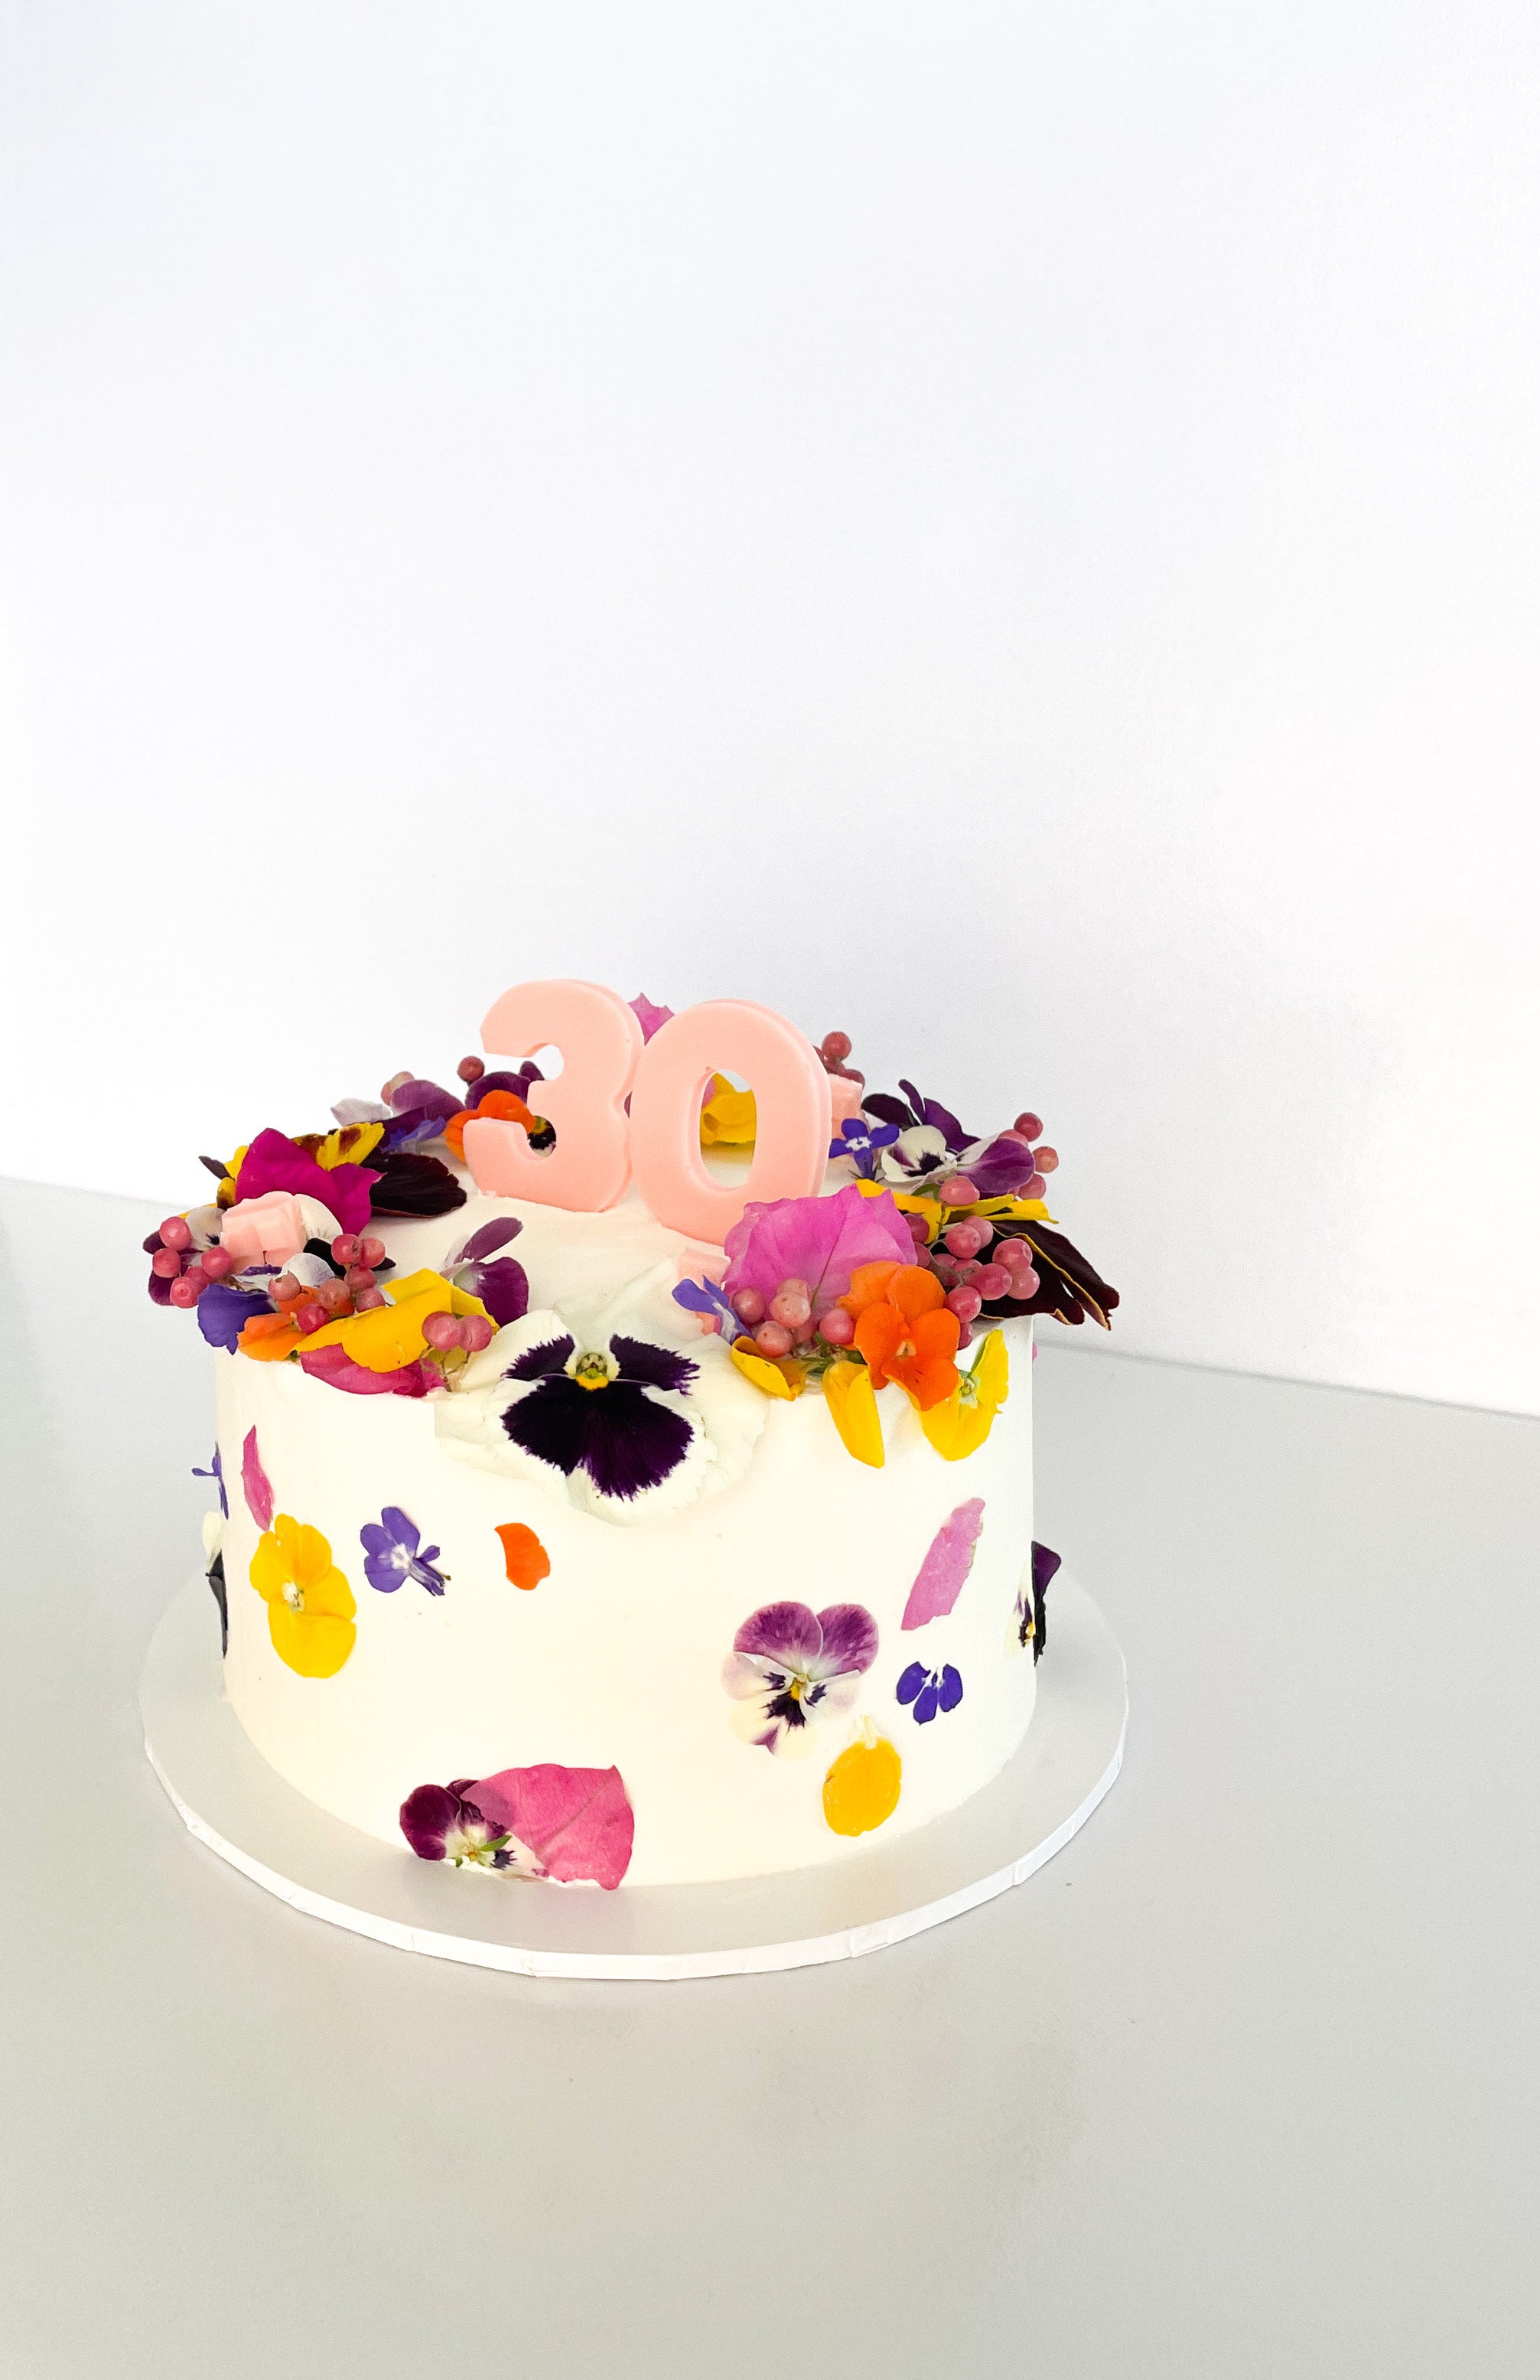 Single-Layer Chocolate Cake with Edible Flowers - Life's Little Sweets